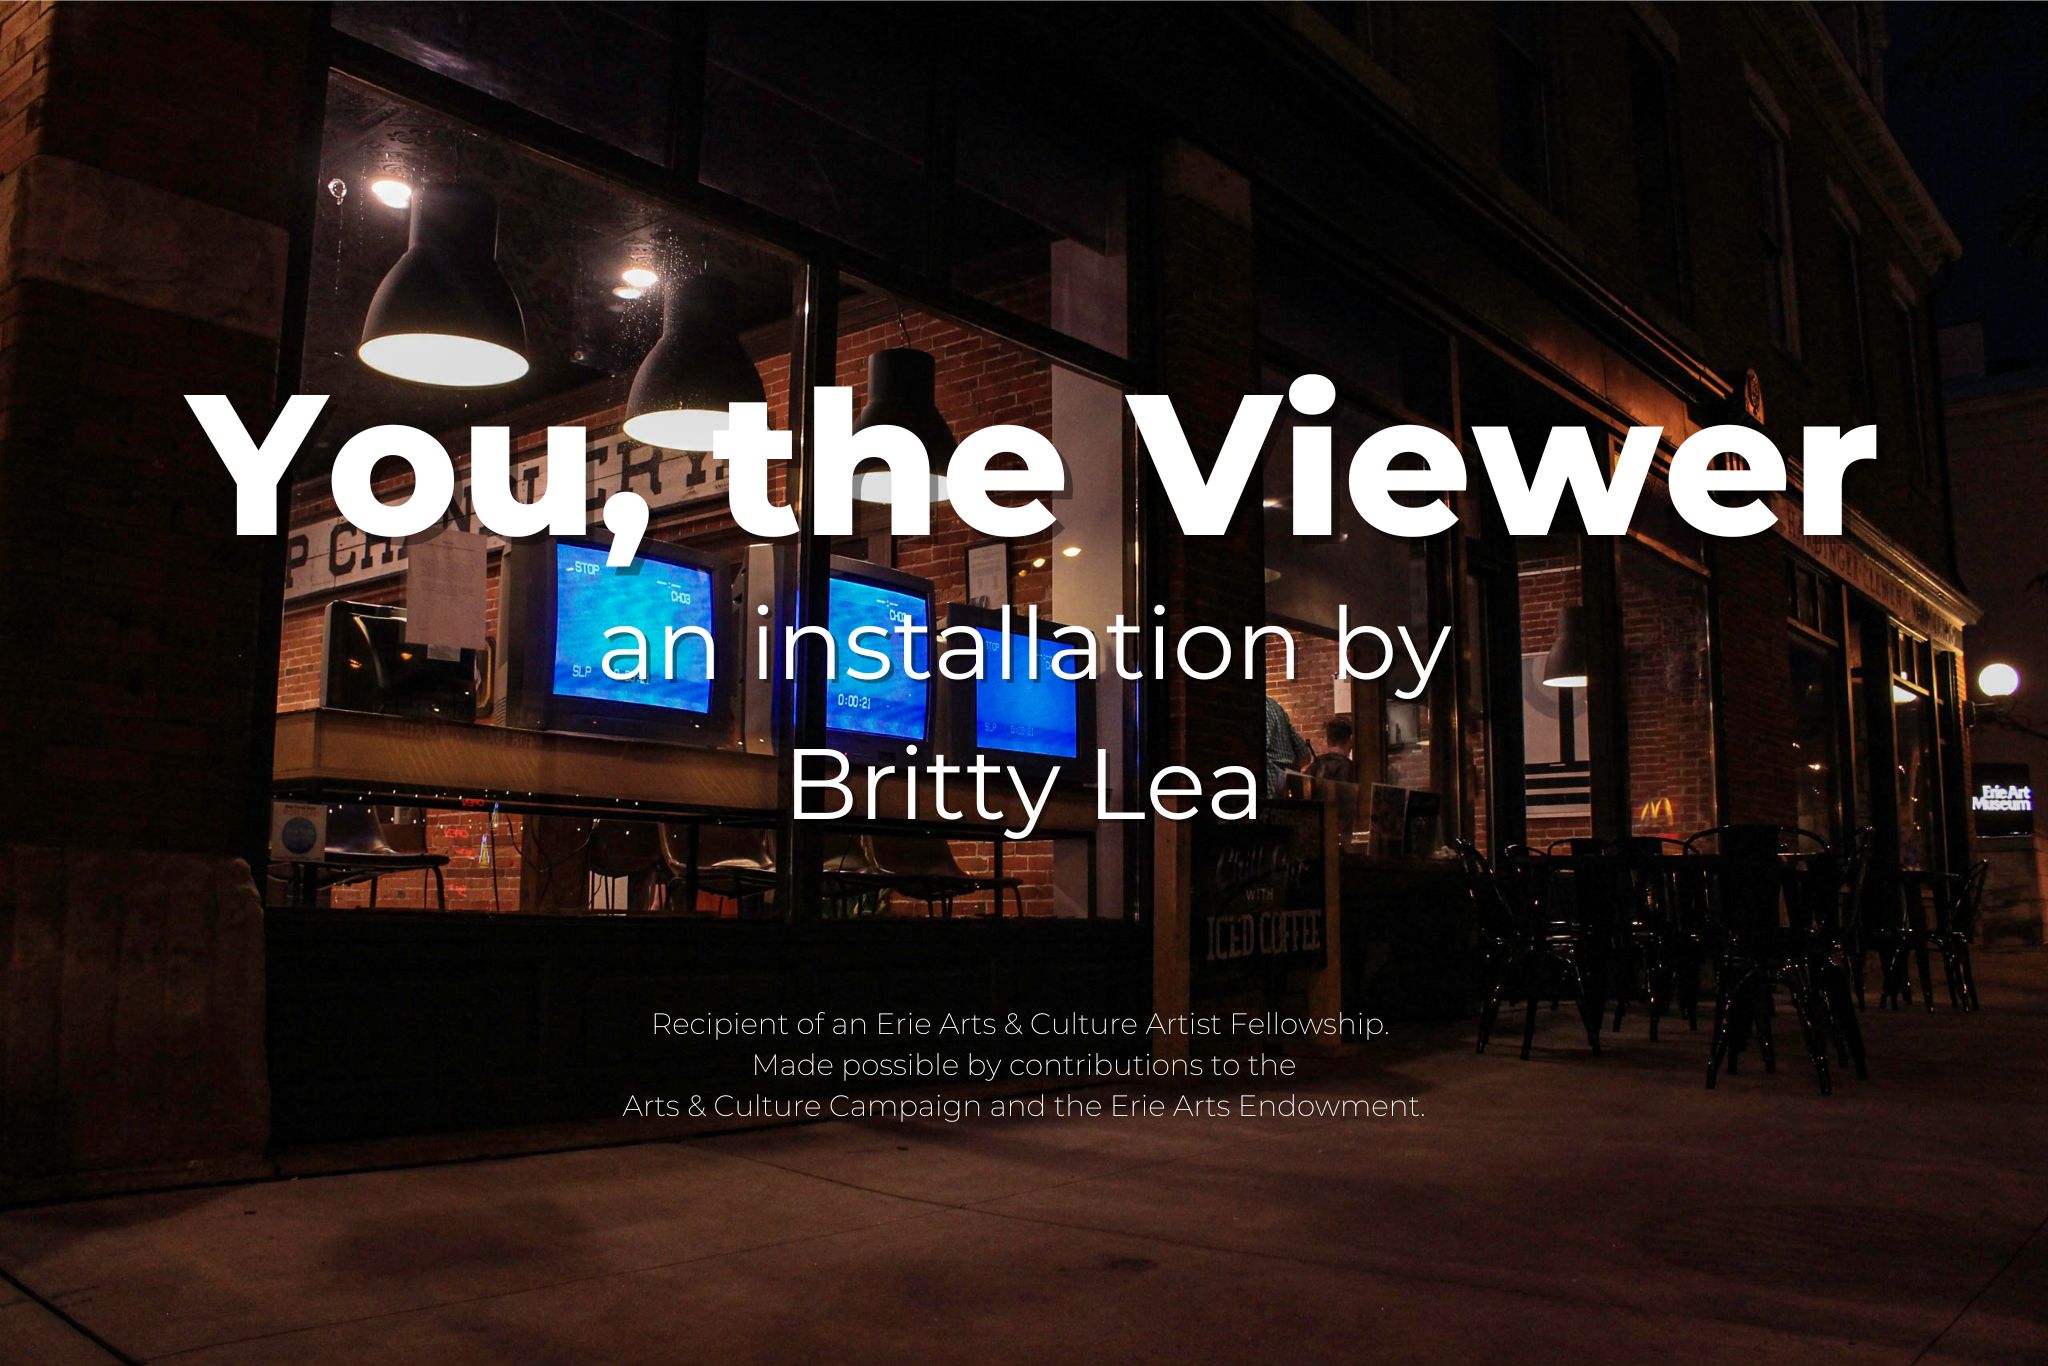 You, the Viewer - An installation by Britty Lea